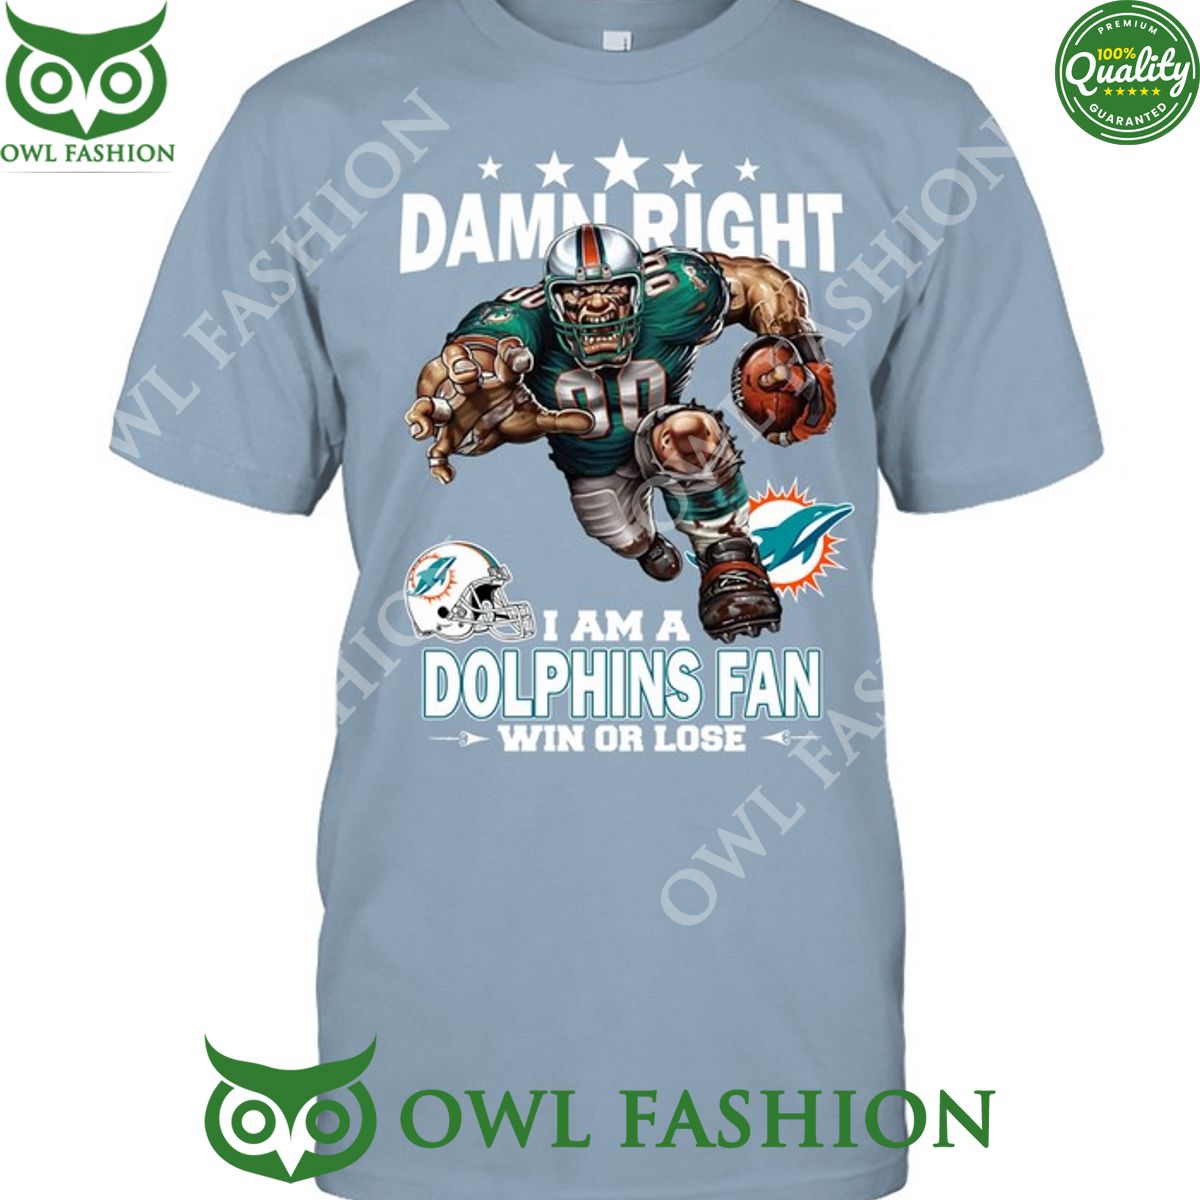 Damn Right Miami Dolphins NFL Fan Win or lose t shirt